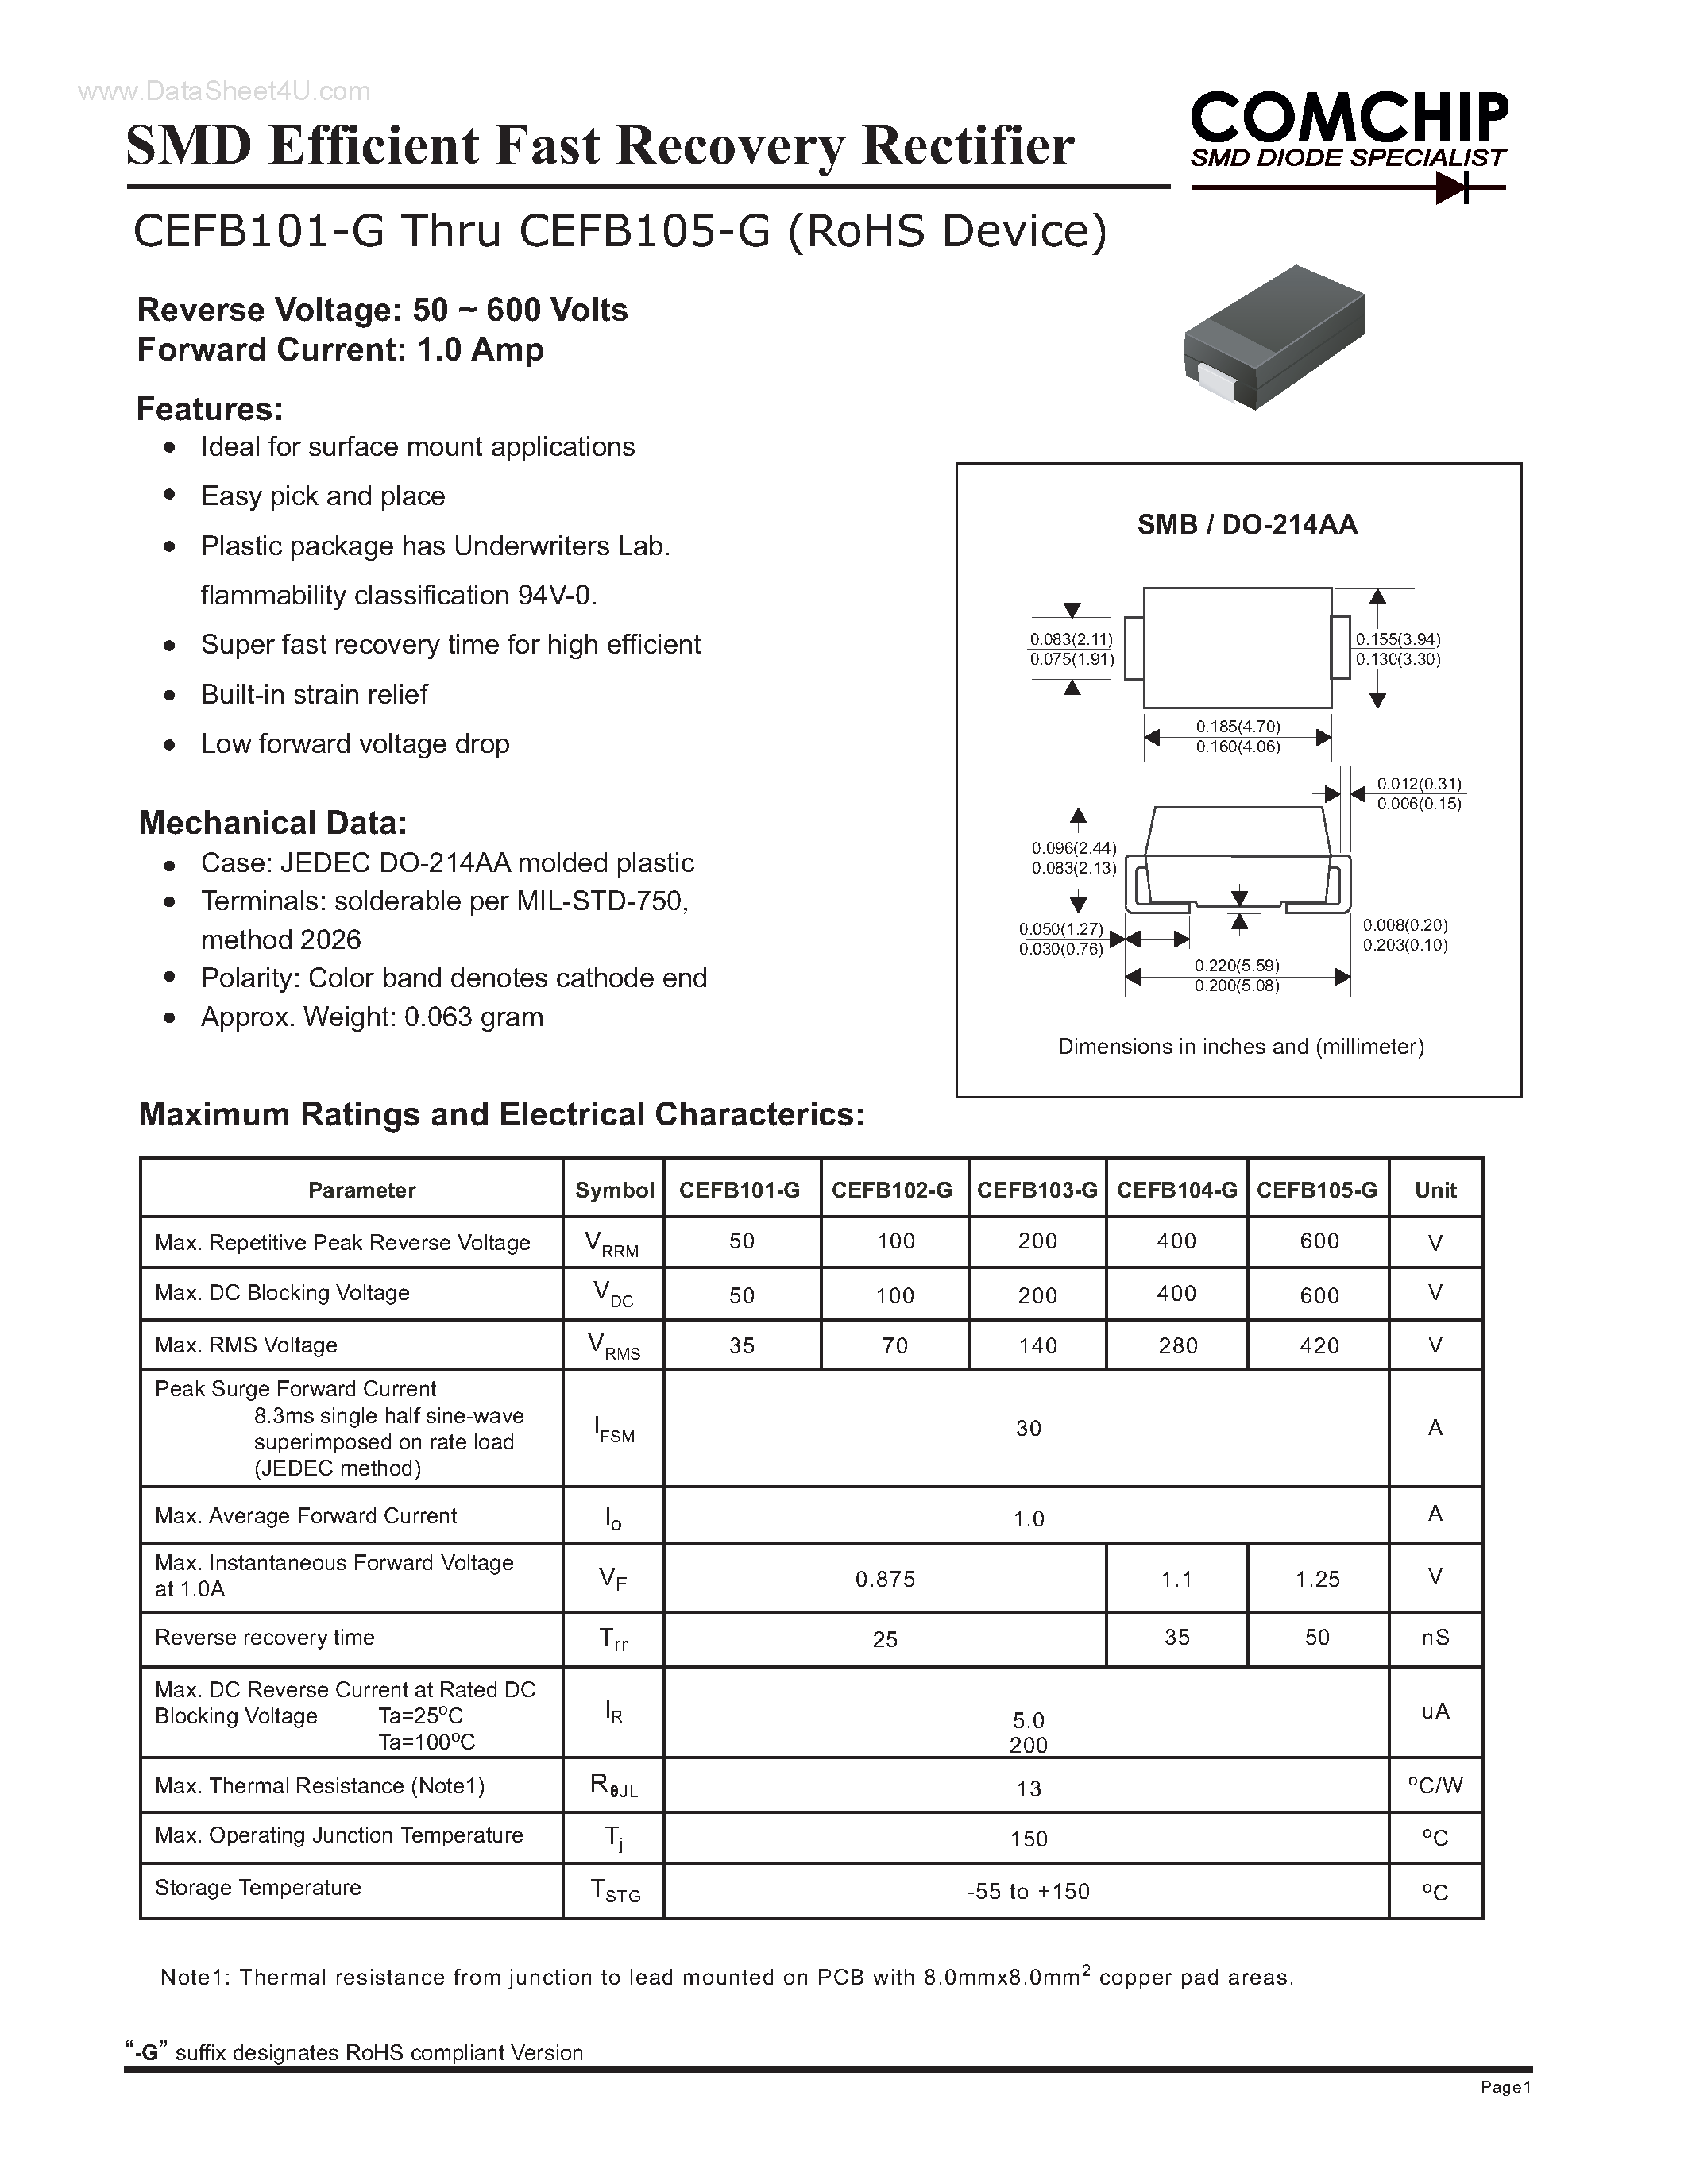 Даташит CEFB101-G - (CEFB101-G - CEFB105-G) SMD Efficient Fast Recovery Rectifier страница 1